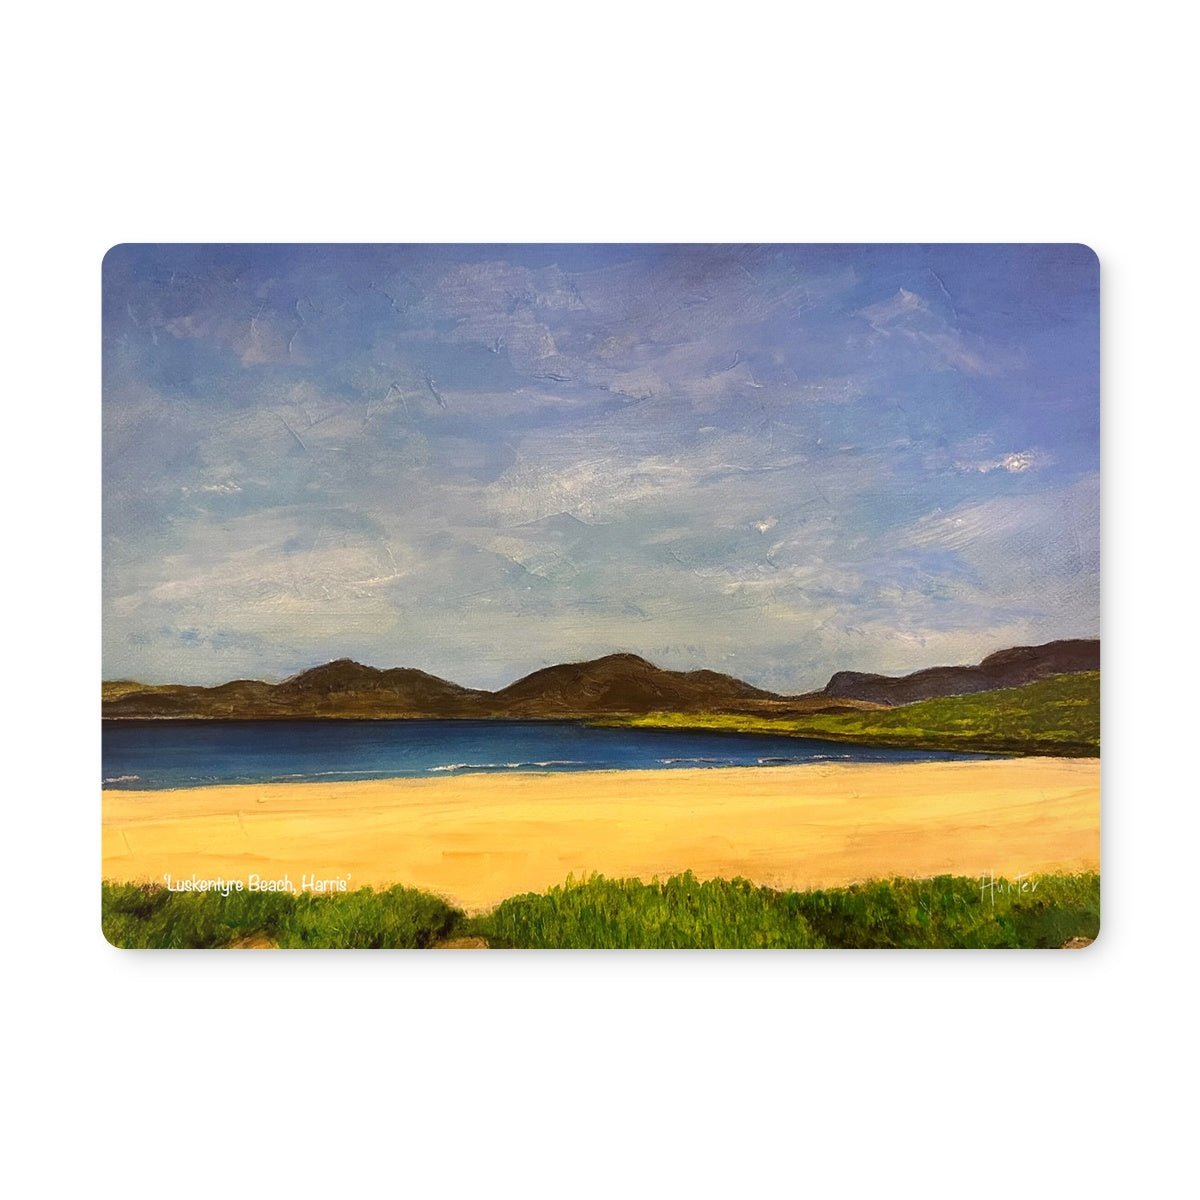 Luskentyre Beach Harris Art Gifts Placemat-Placemats-Hebridean Islands Art Gallery-2 Placemats-Paintings, Prints, Homeware, Art Gifts From Scotland By Scottish Artist Kevin Hunter